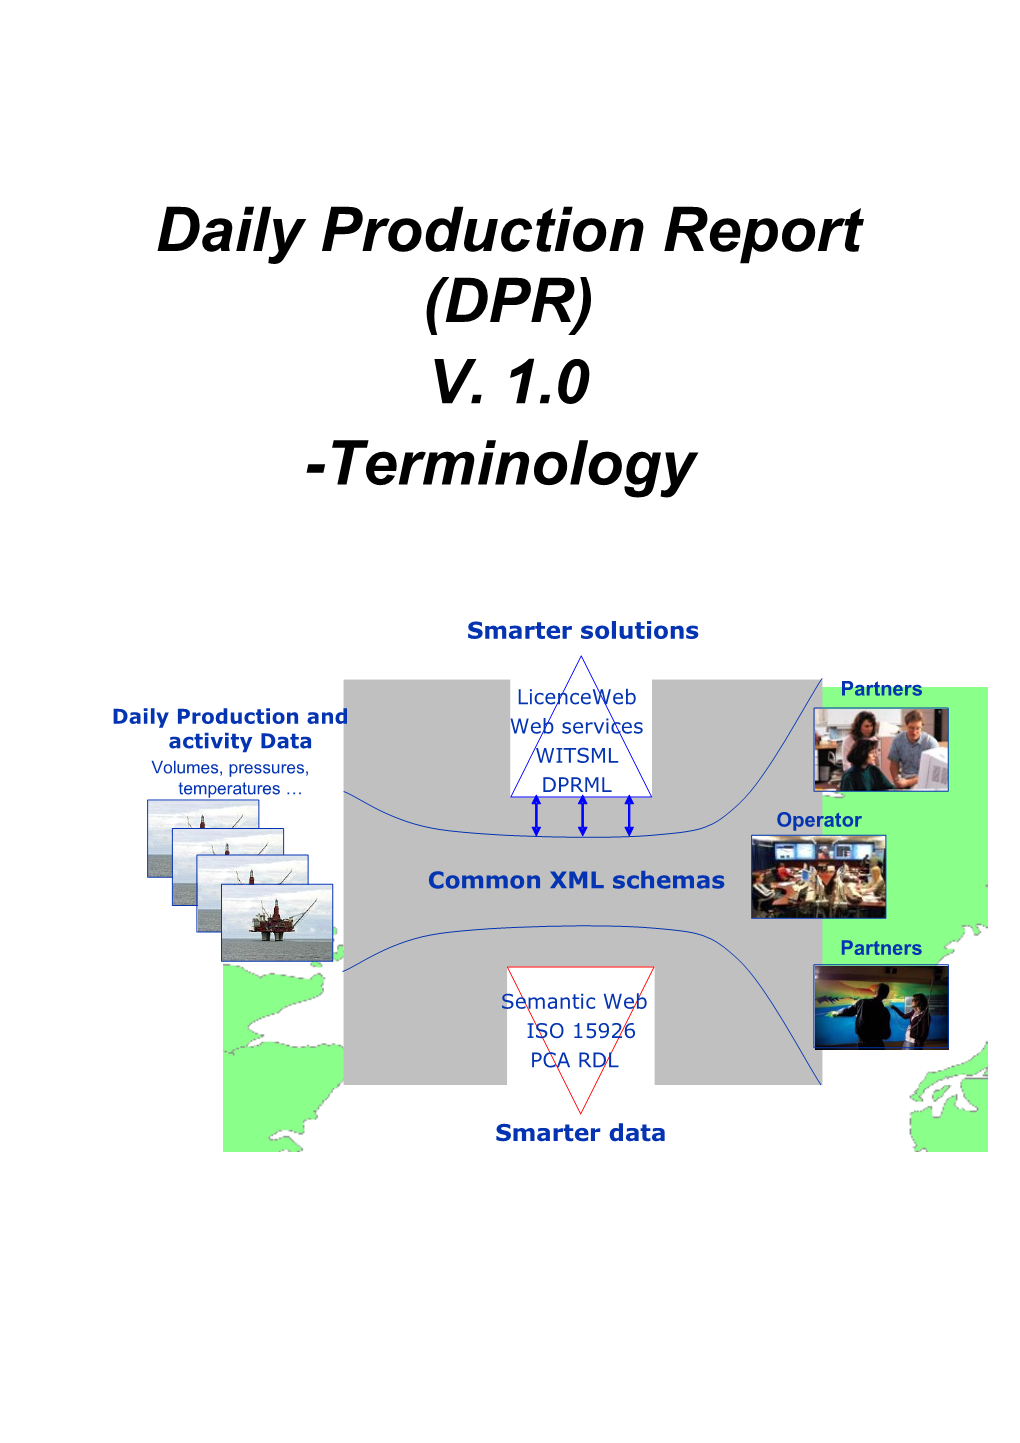 Daily Production Report (DPR) s1